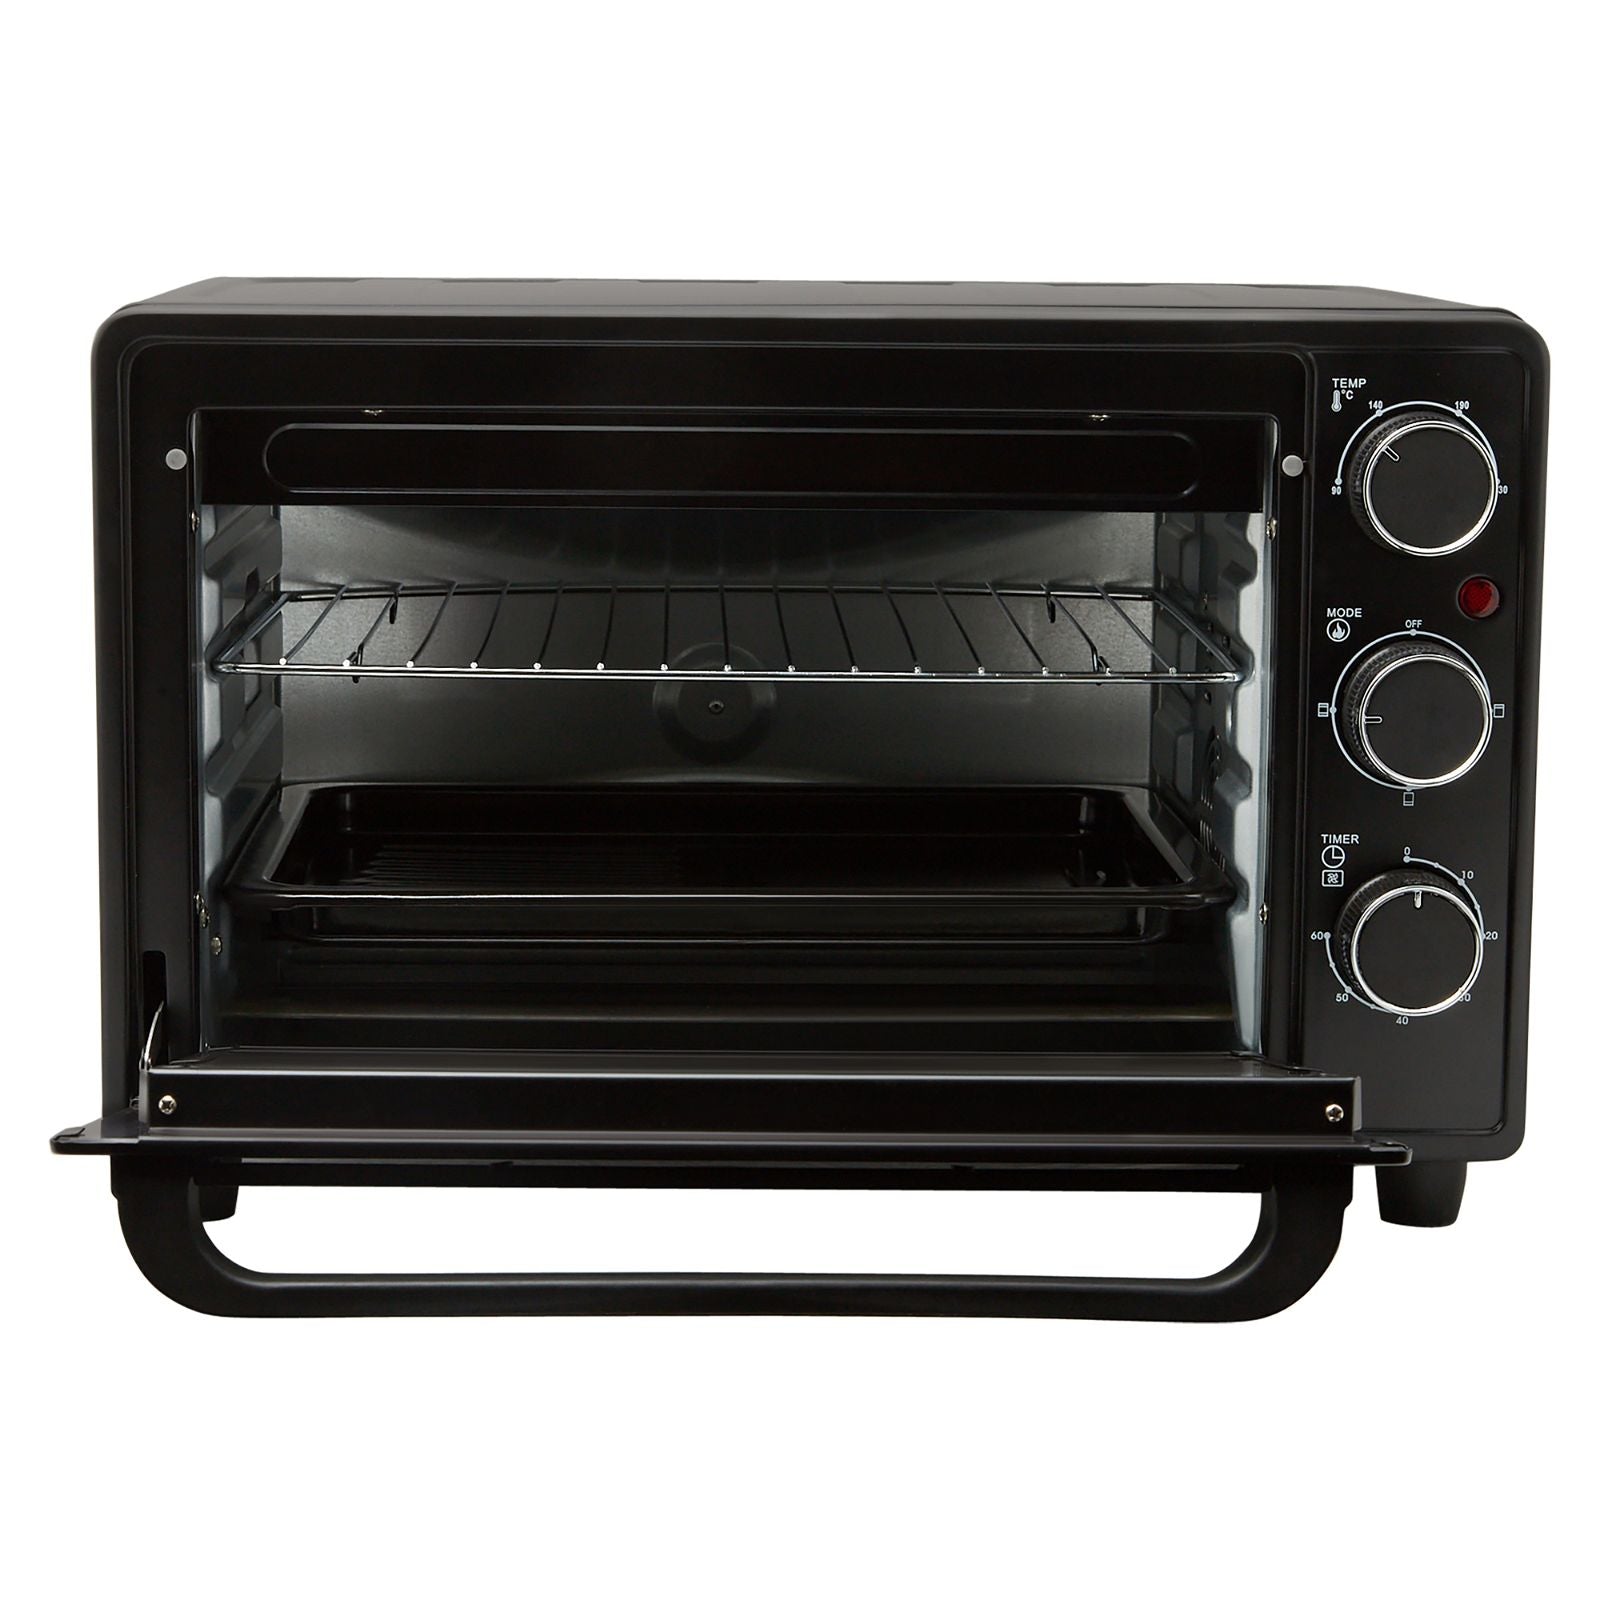 Westinghouse Bench Top Oven 26L Multi-Element Control-#product_category#- Distributed by:  under license